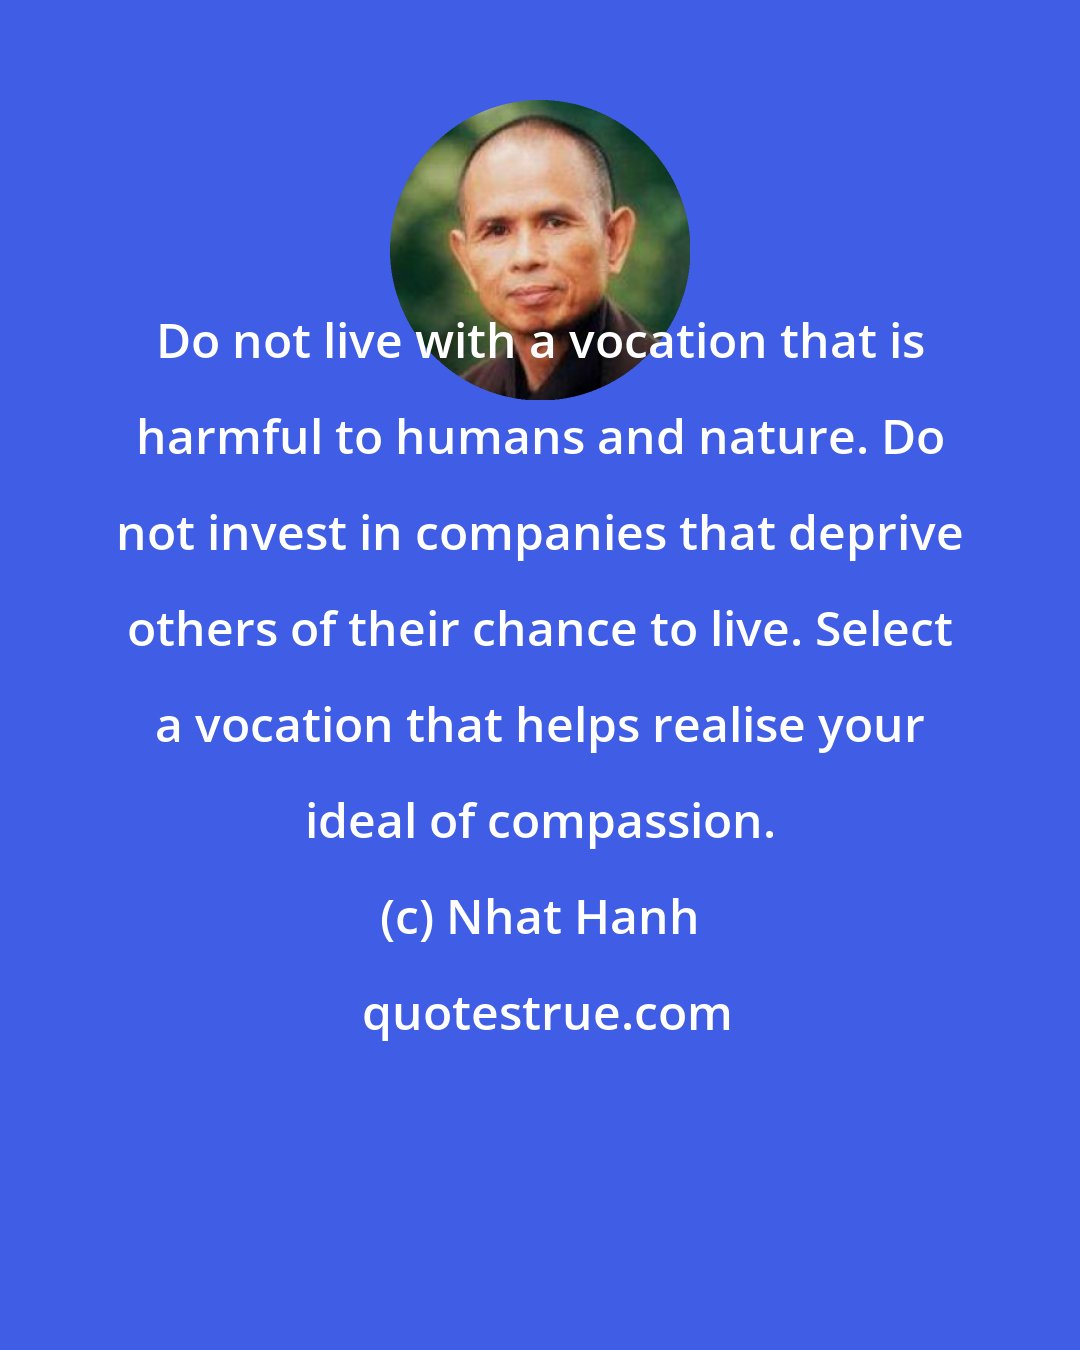 Nhat Hanh: Do not live with a vocation that is harmful to humans and nature. Do not invest in companies that deprive others of their chance to live. Select a vocation that helps realise your ideal of compassion.